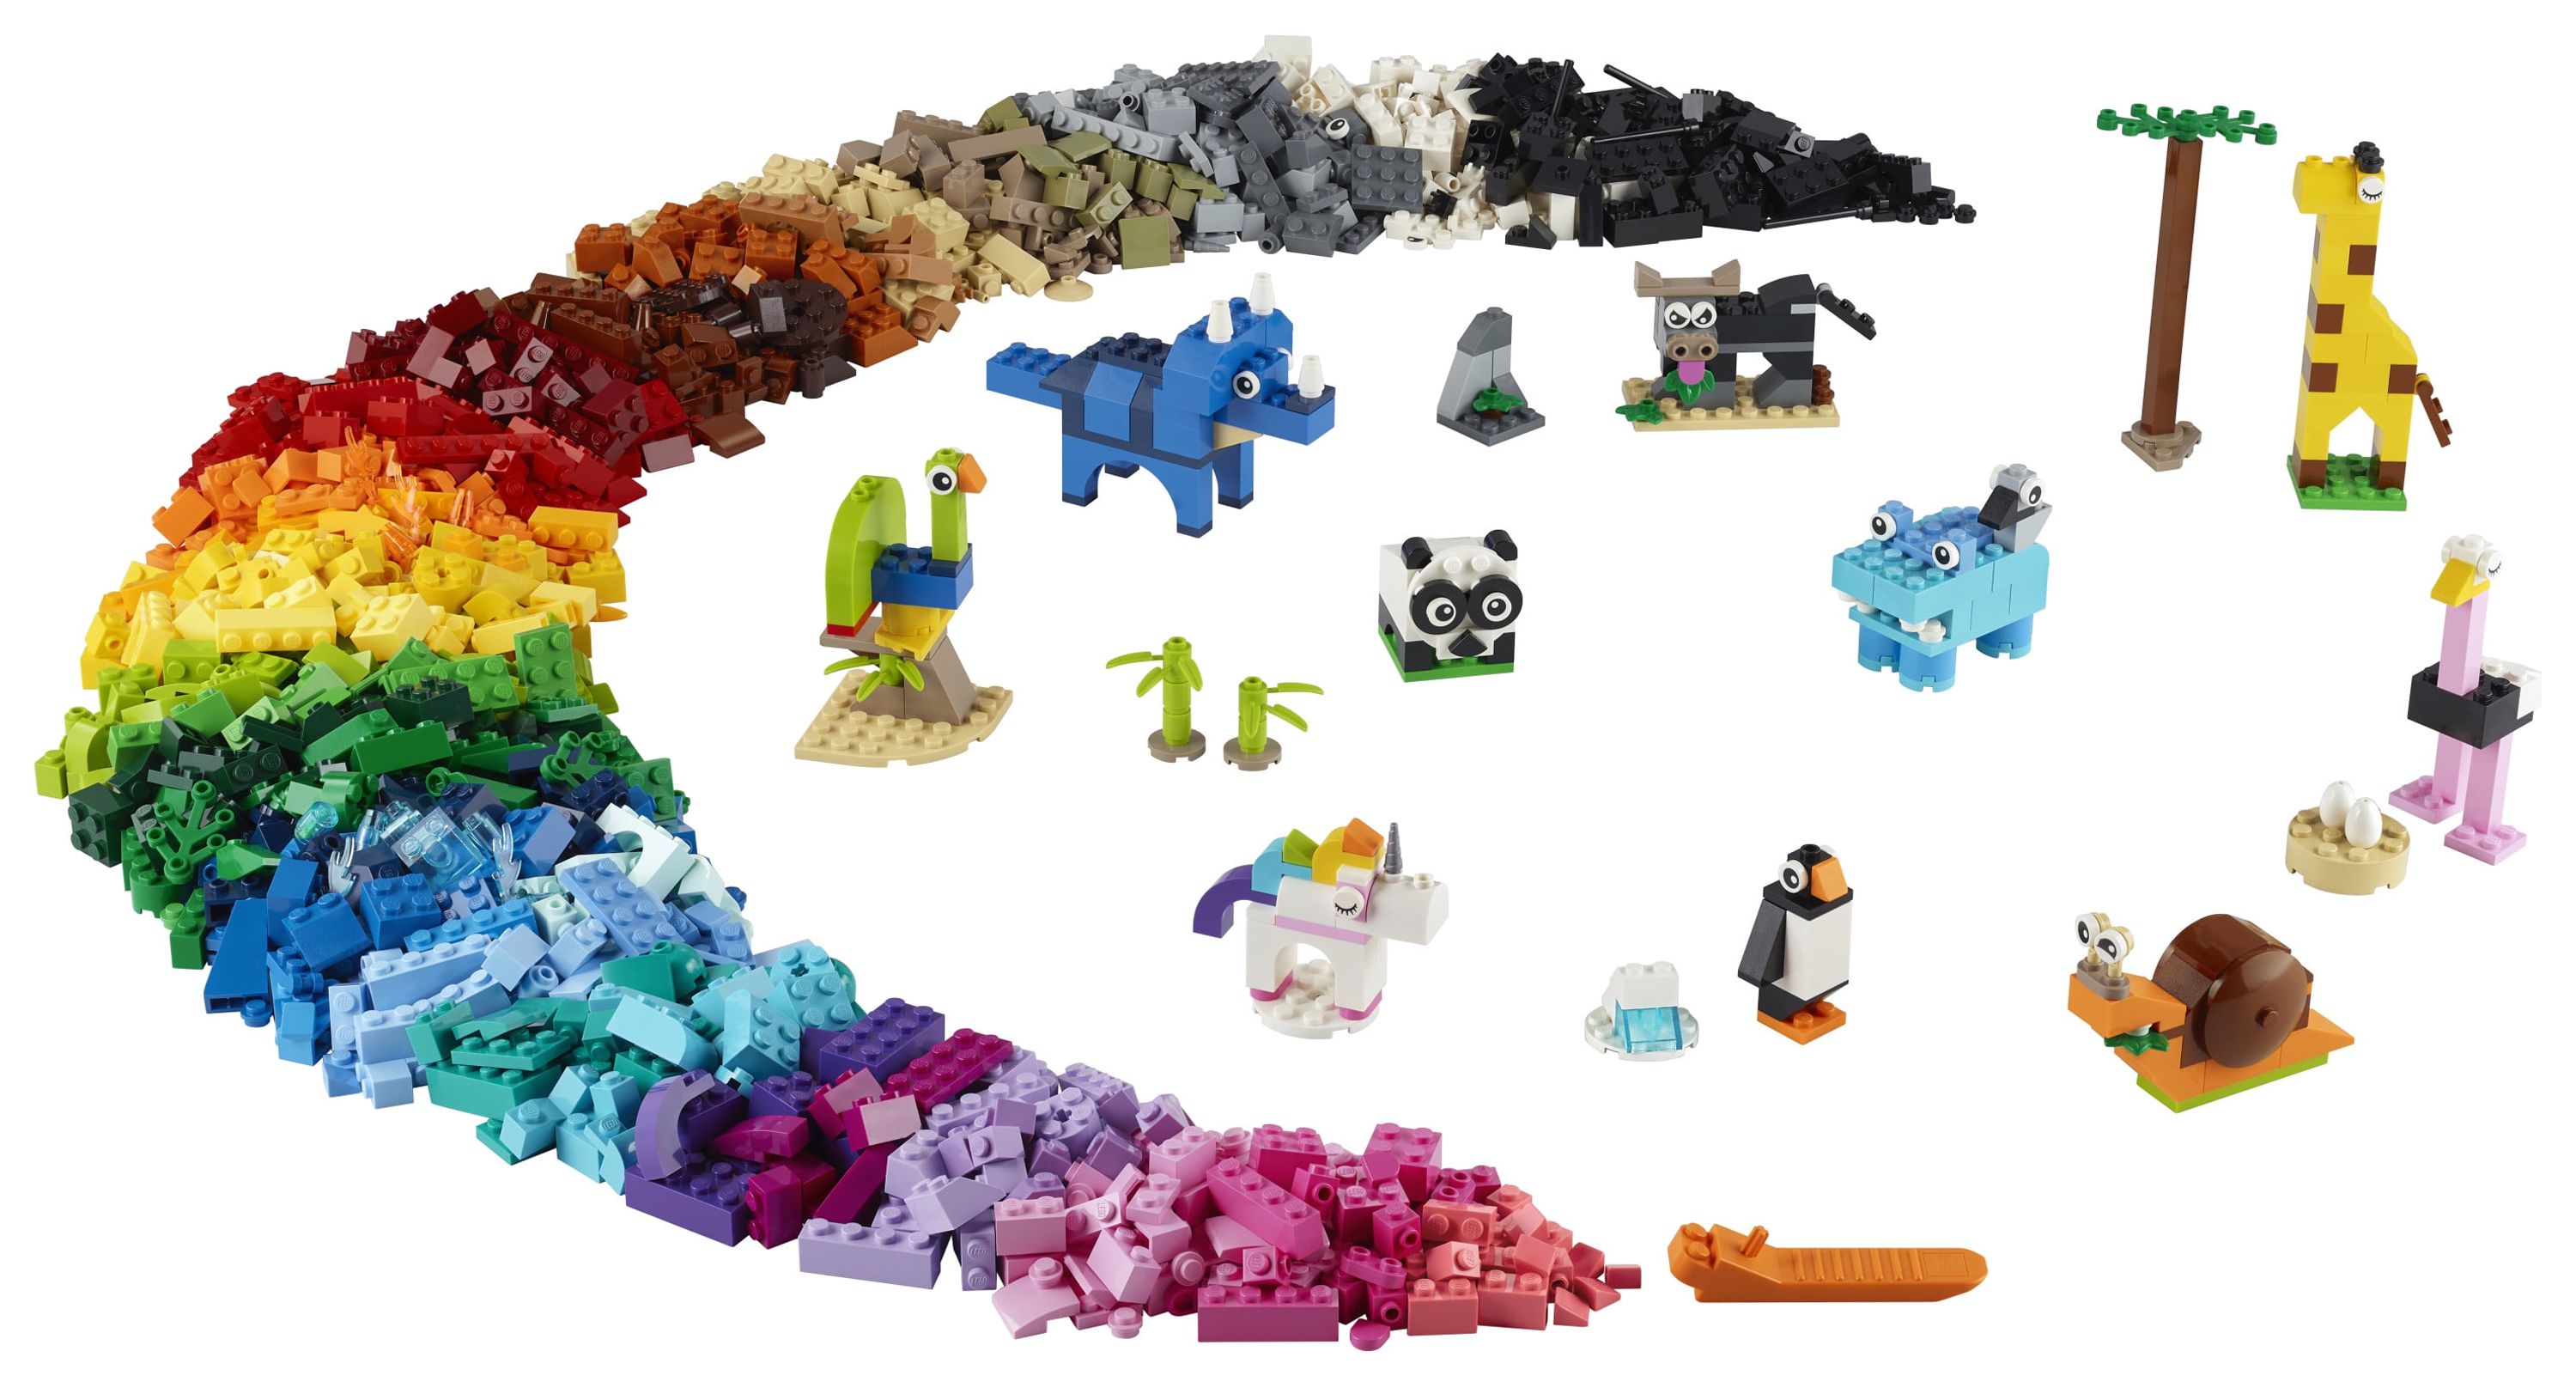 LEGO Classic Bricks and Animals 11011 Creative Toy That Builds into 10 Amazing Animal Figures (1,500 Pieces) - image 3 of 6